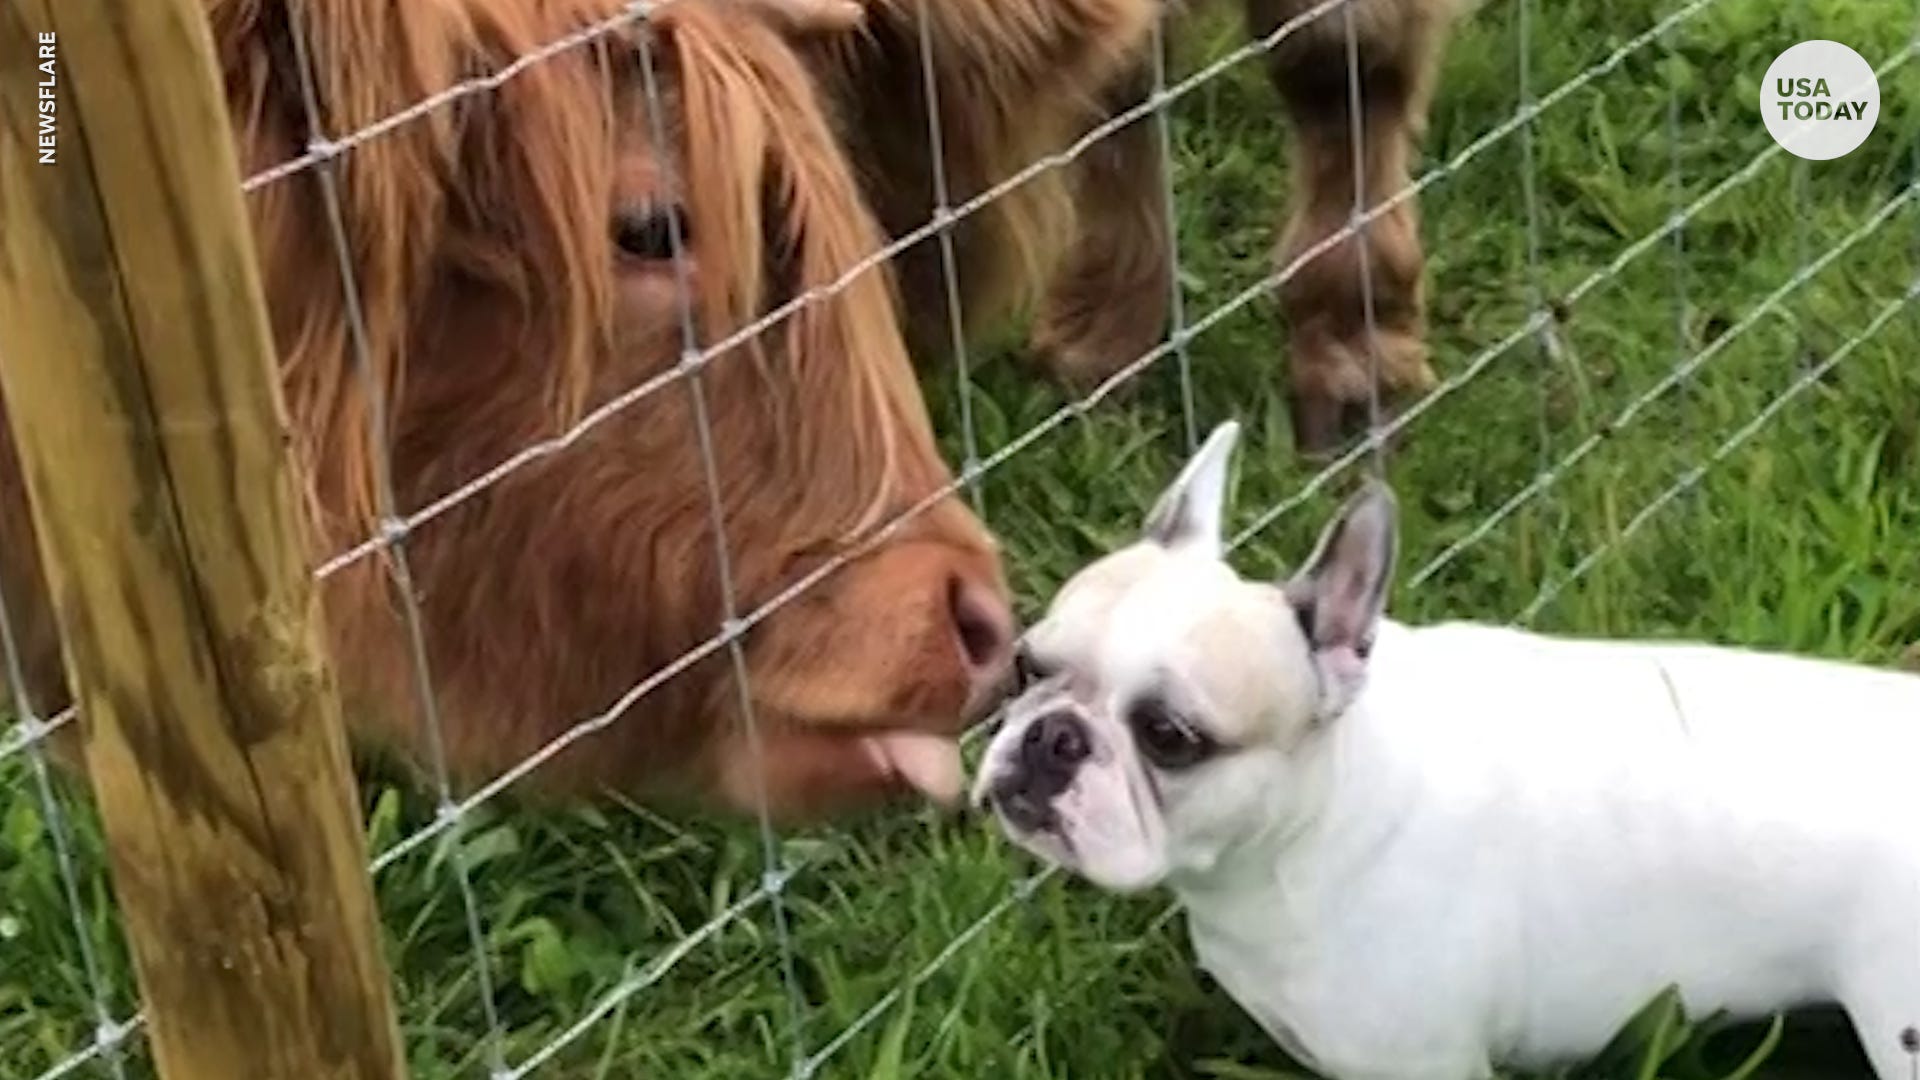 are dogs or cows smarter